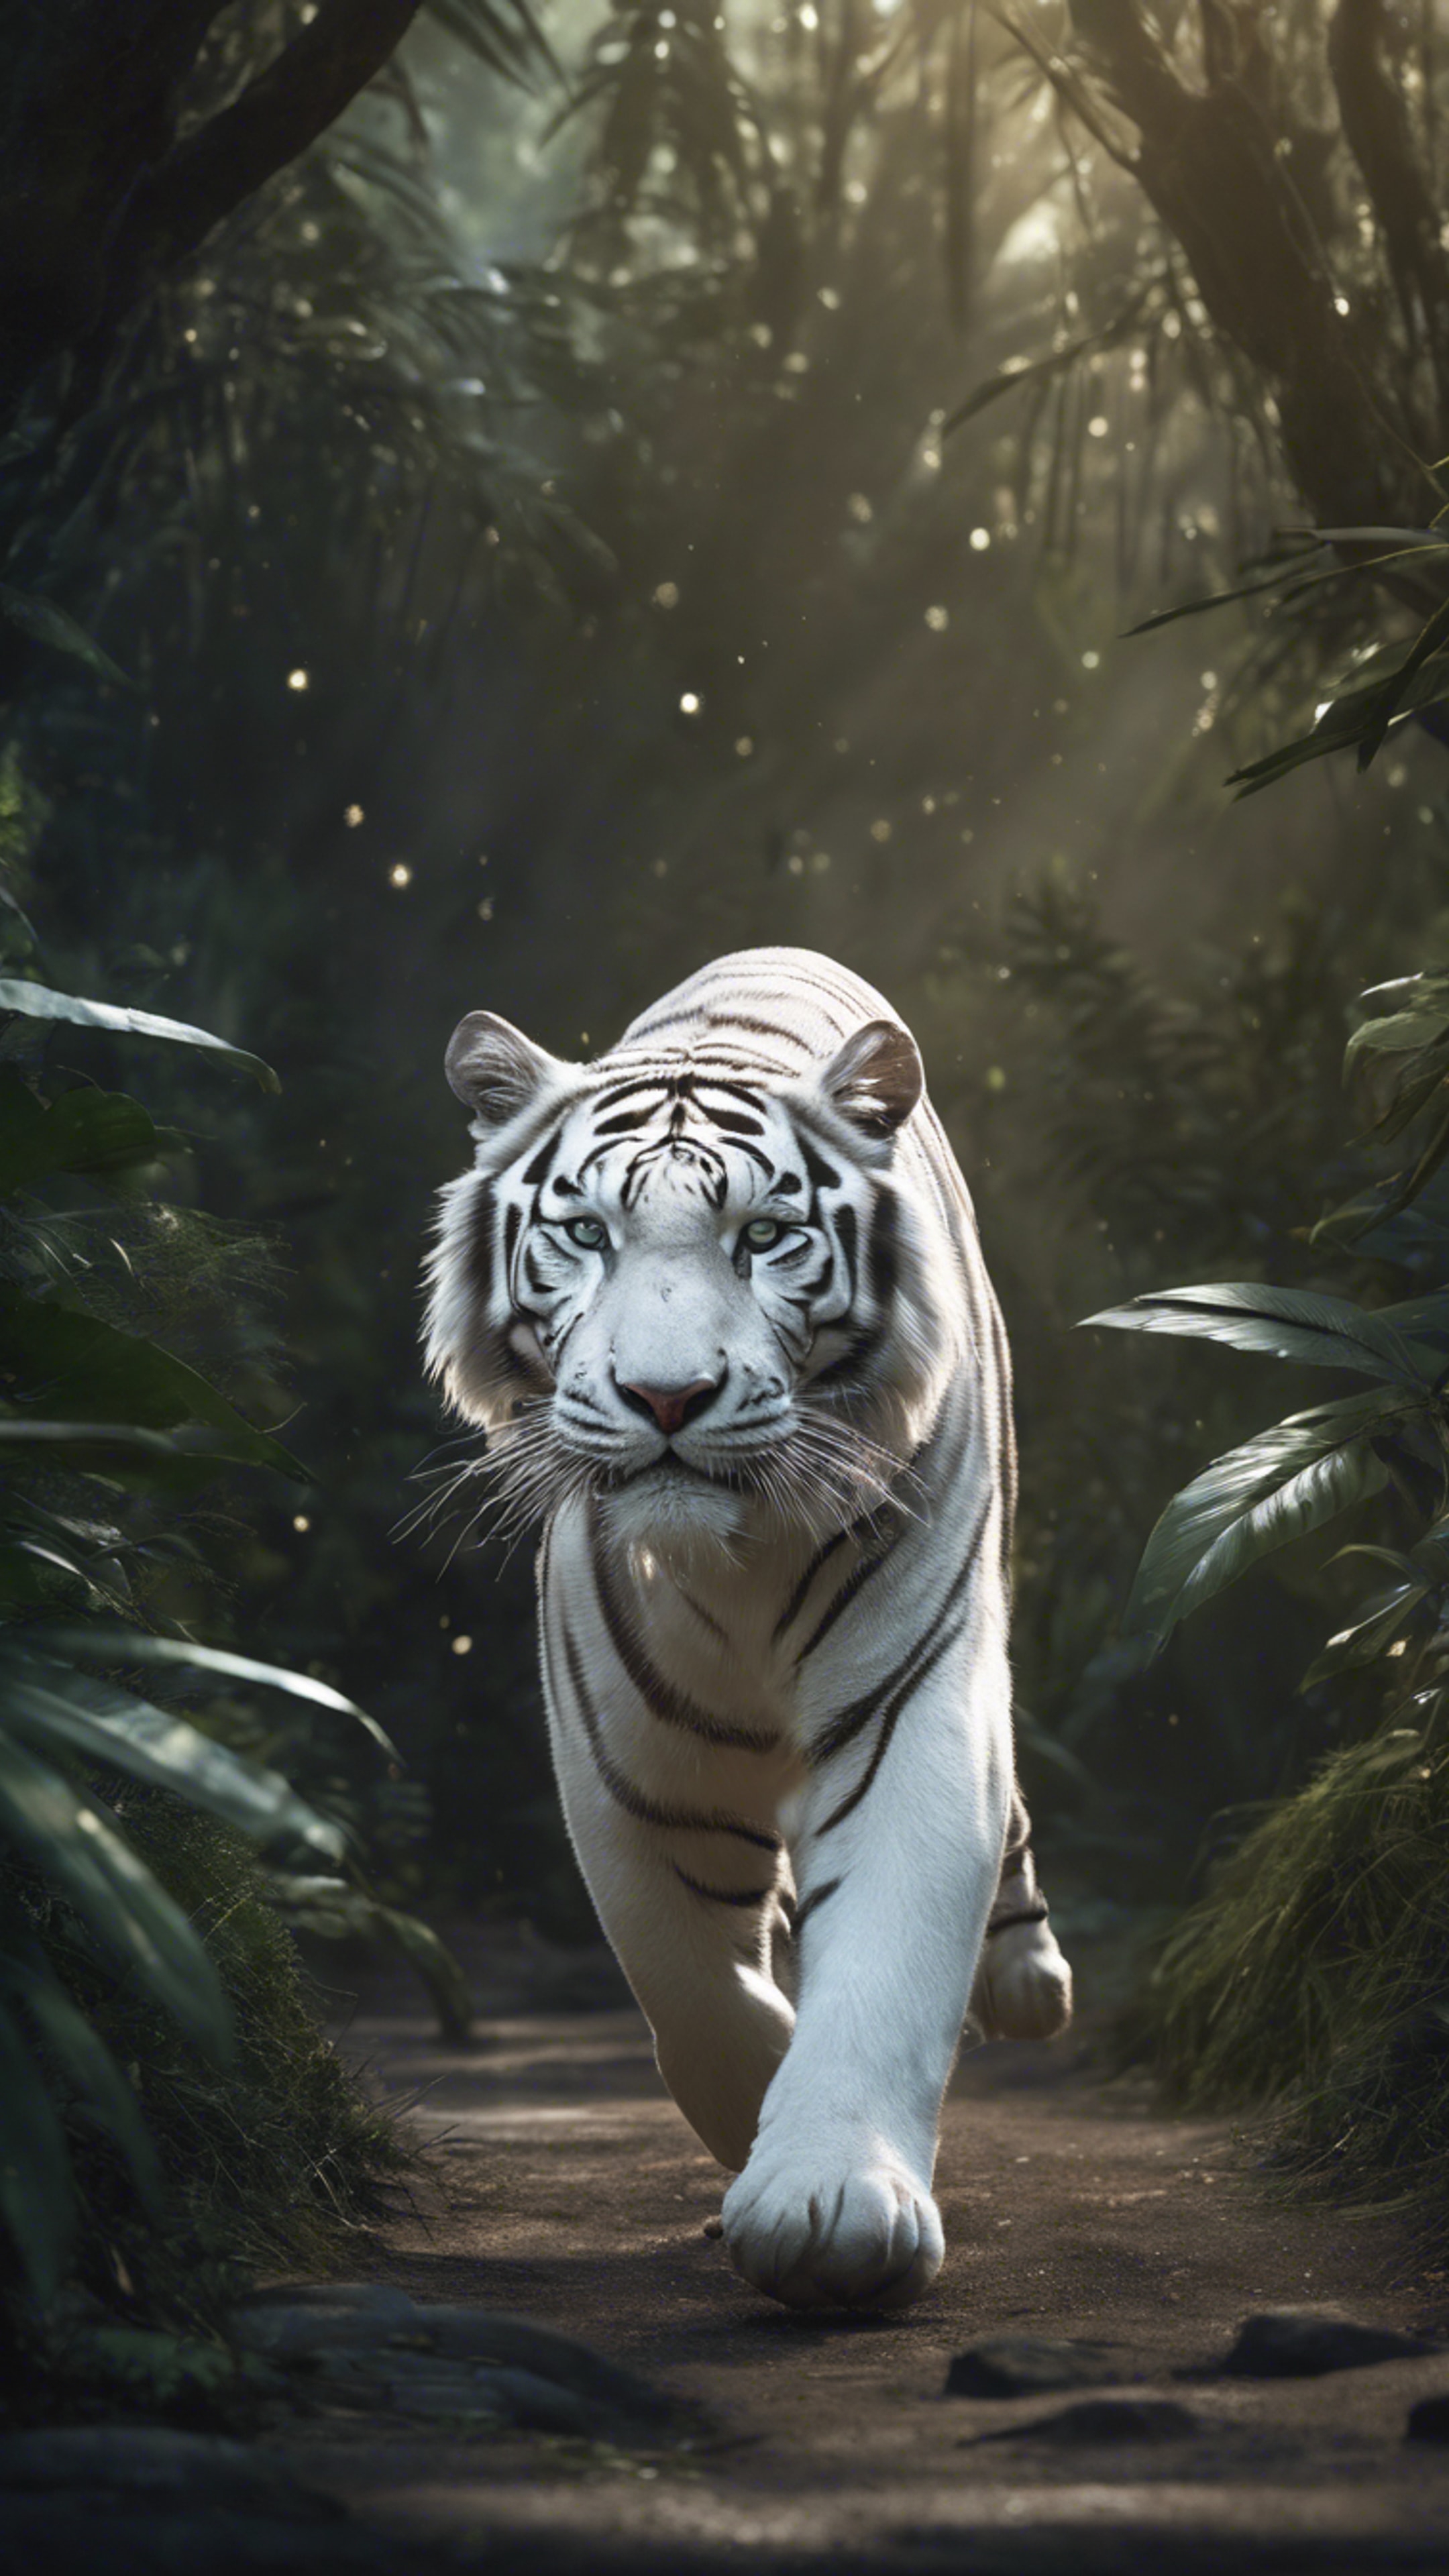 A cool white tiger, with silver stripes, strides powerfully through a moonlit jungle. Tapet[5d9925a4be334da199e0]